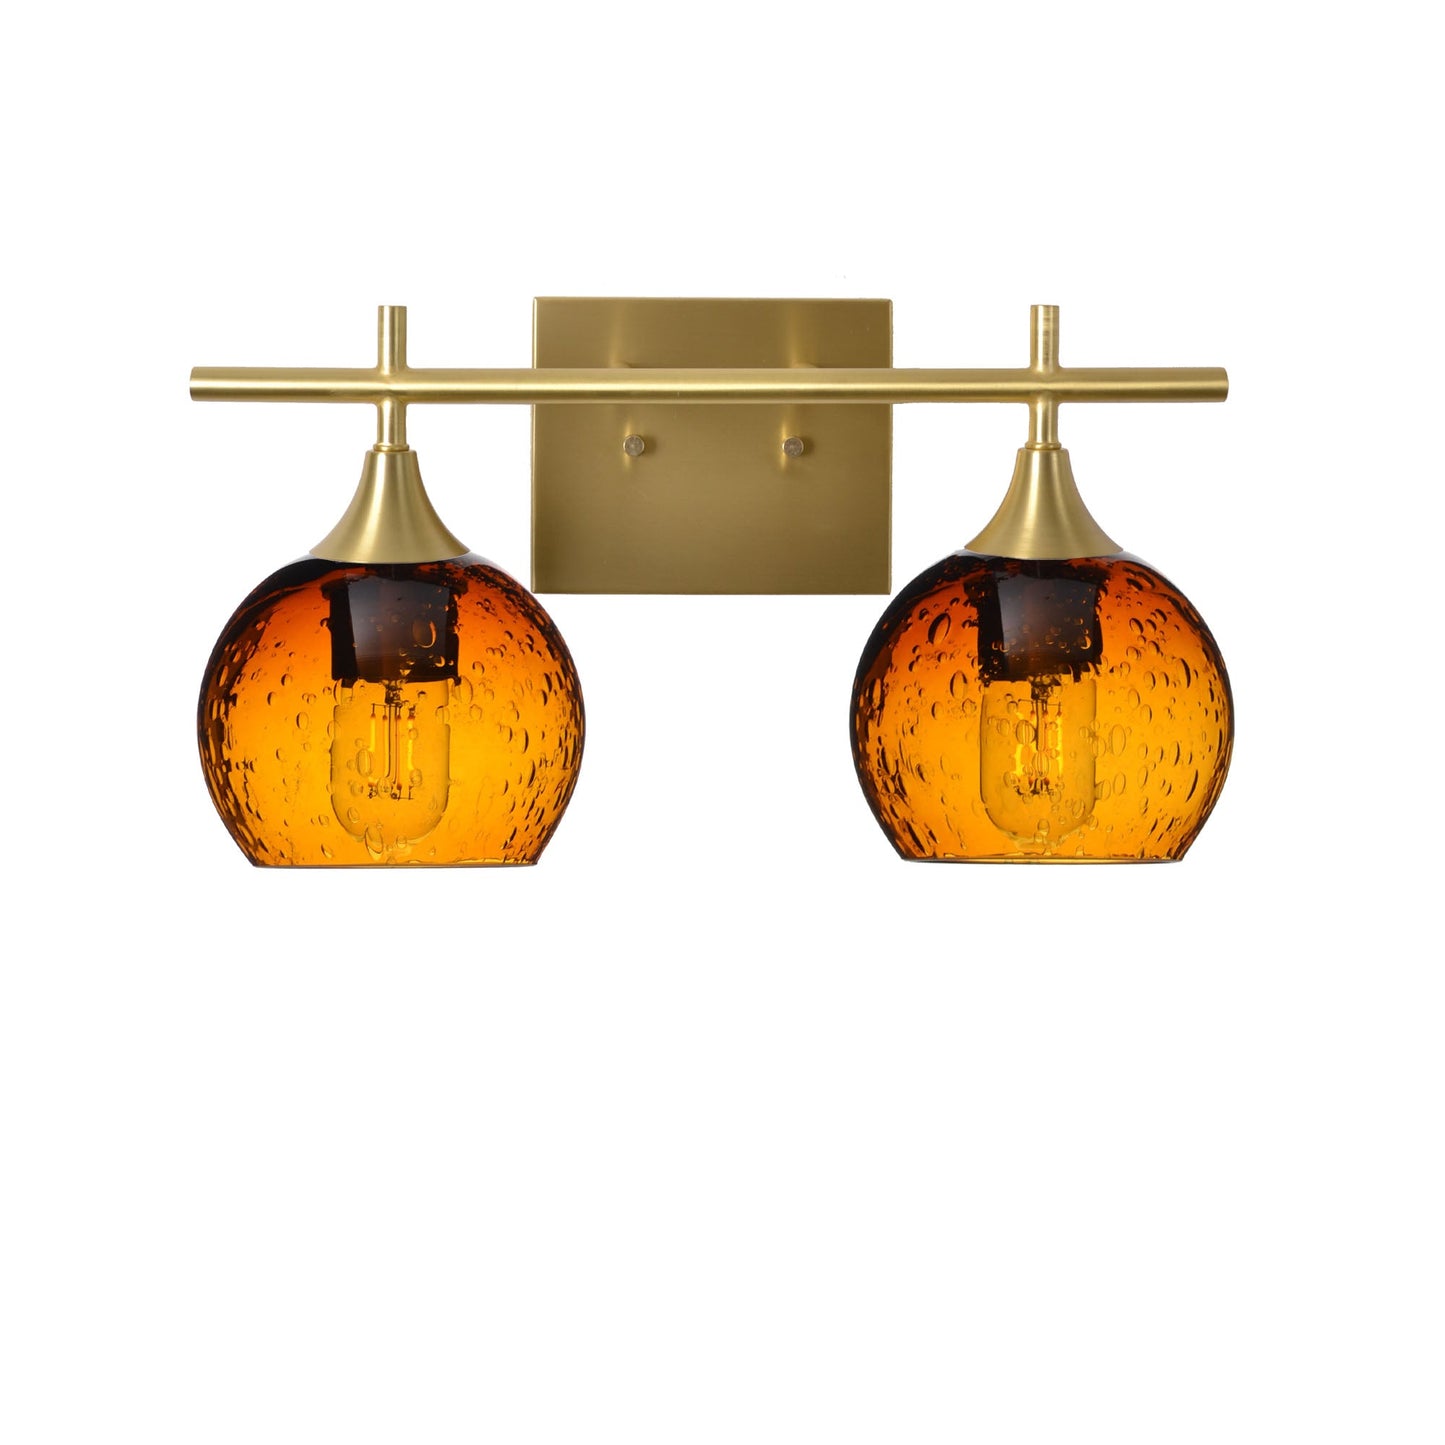 763 Lunar: 2 Light Wall Vanity-Glass-Bicycle Glass Co - Hotshop-Golden Amber-Satin Brass-Bicycle Glass Co